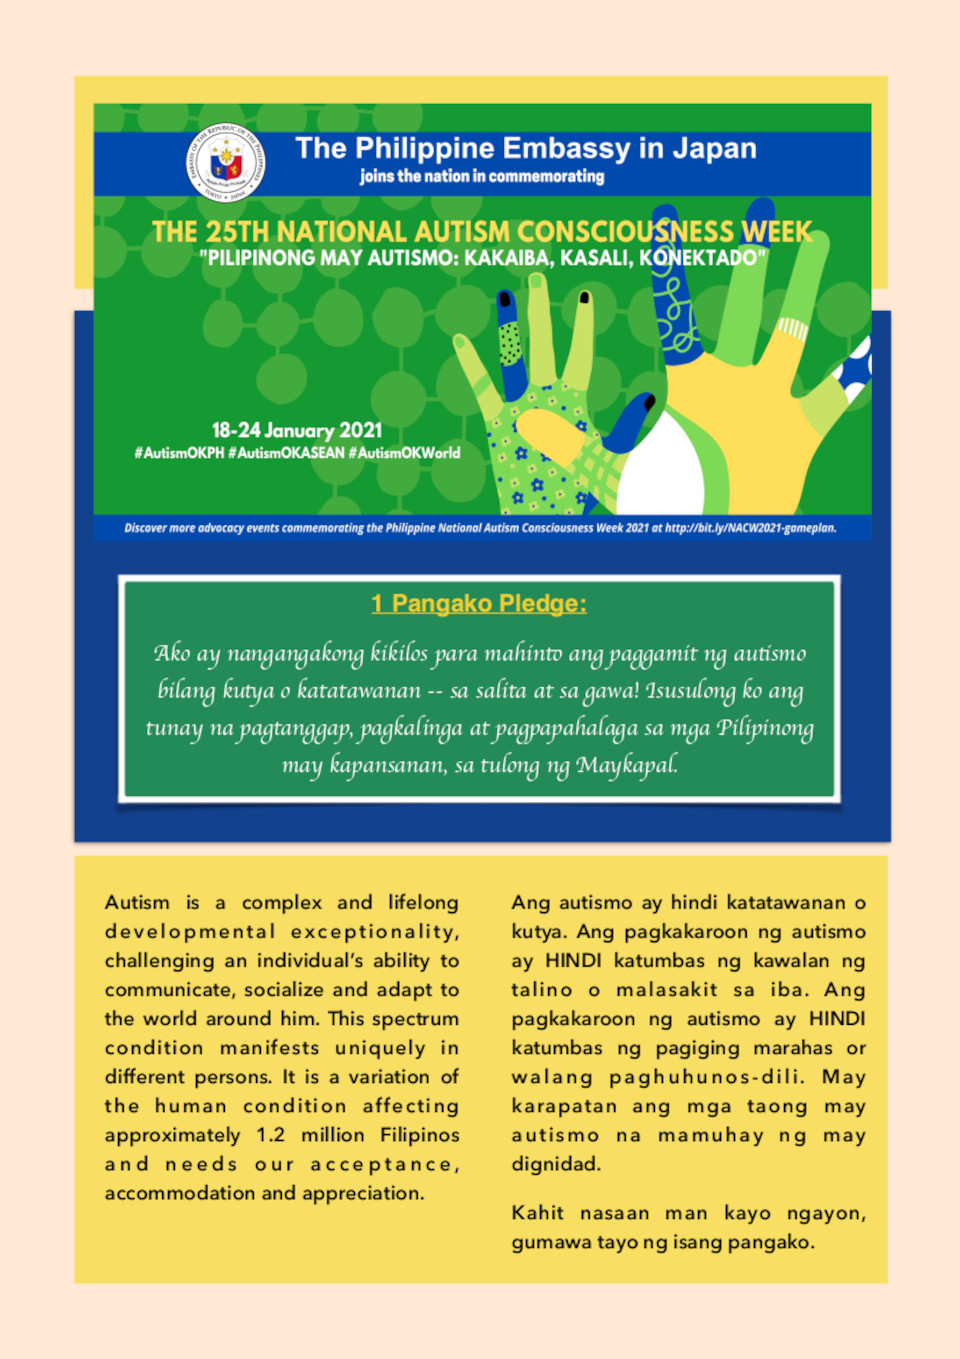 25th National Autism Consciousness Week Philippine Embassy Tokyo, Japan